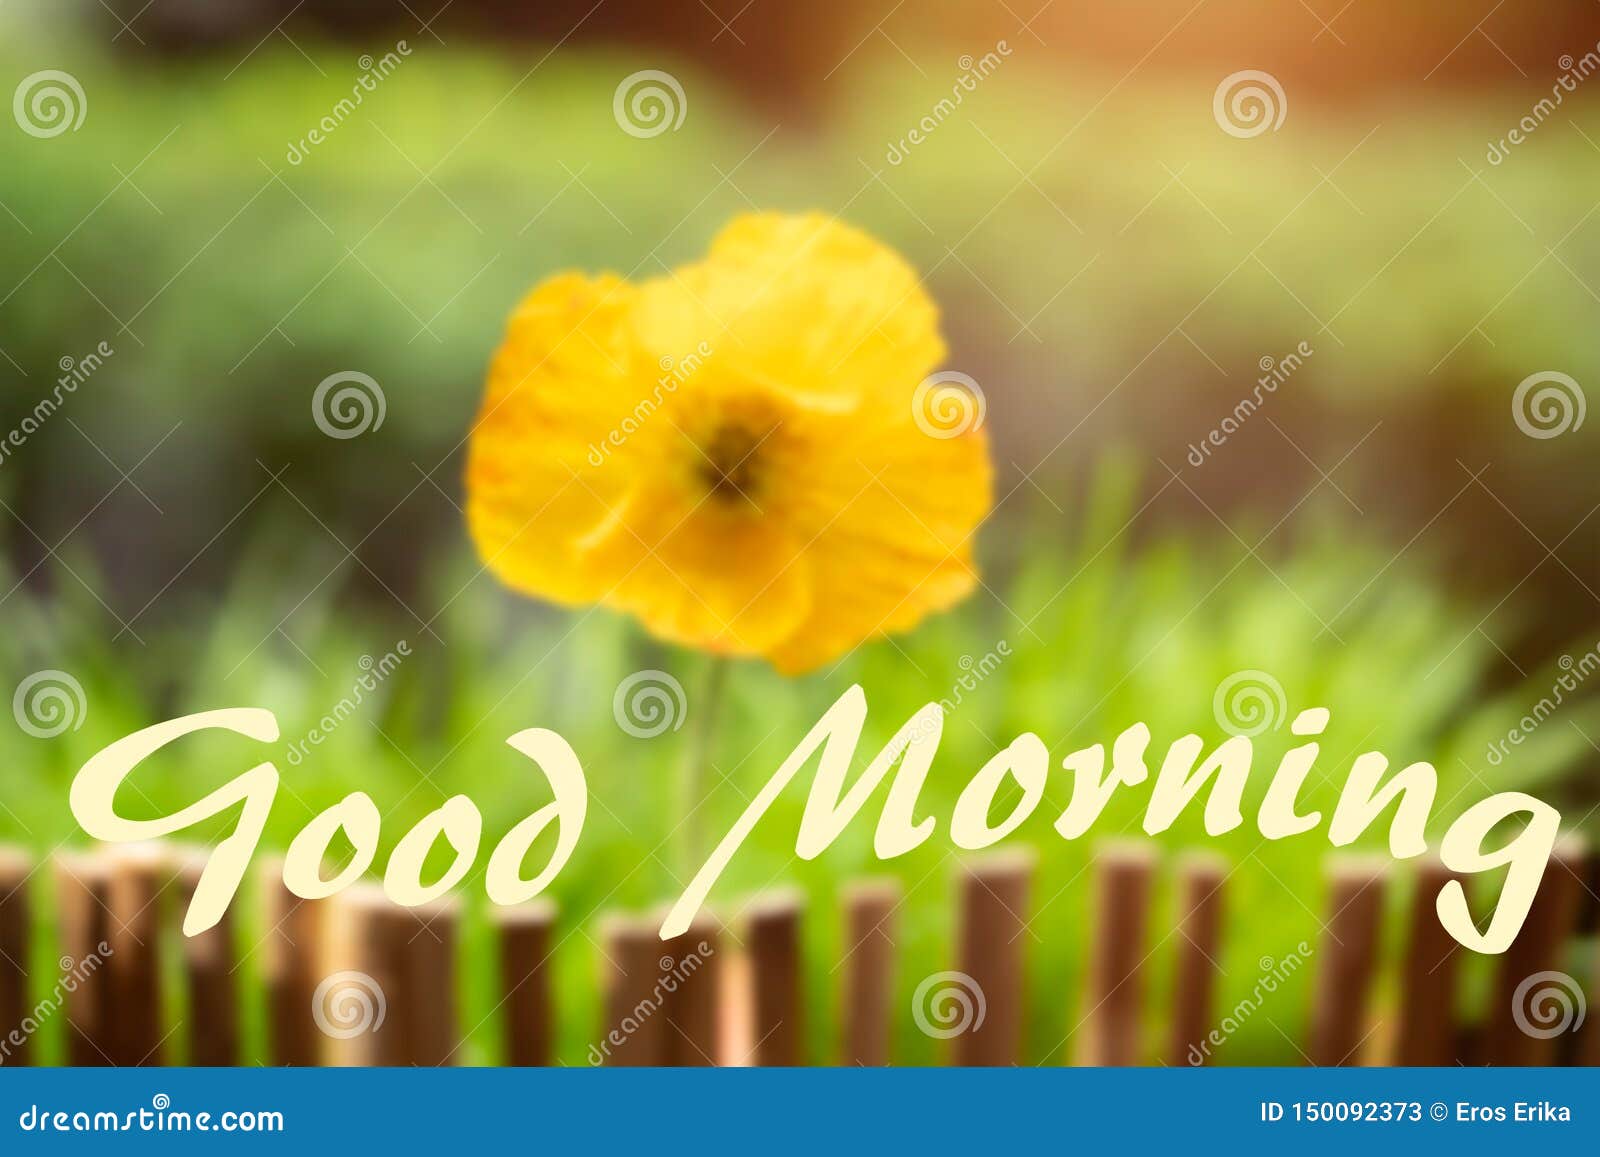 Good Morning Message on a Fresh Floral Background Stock Image ...